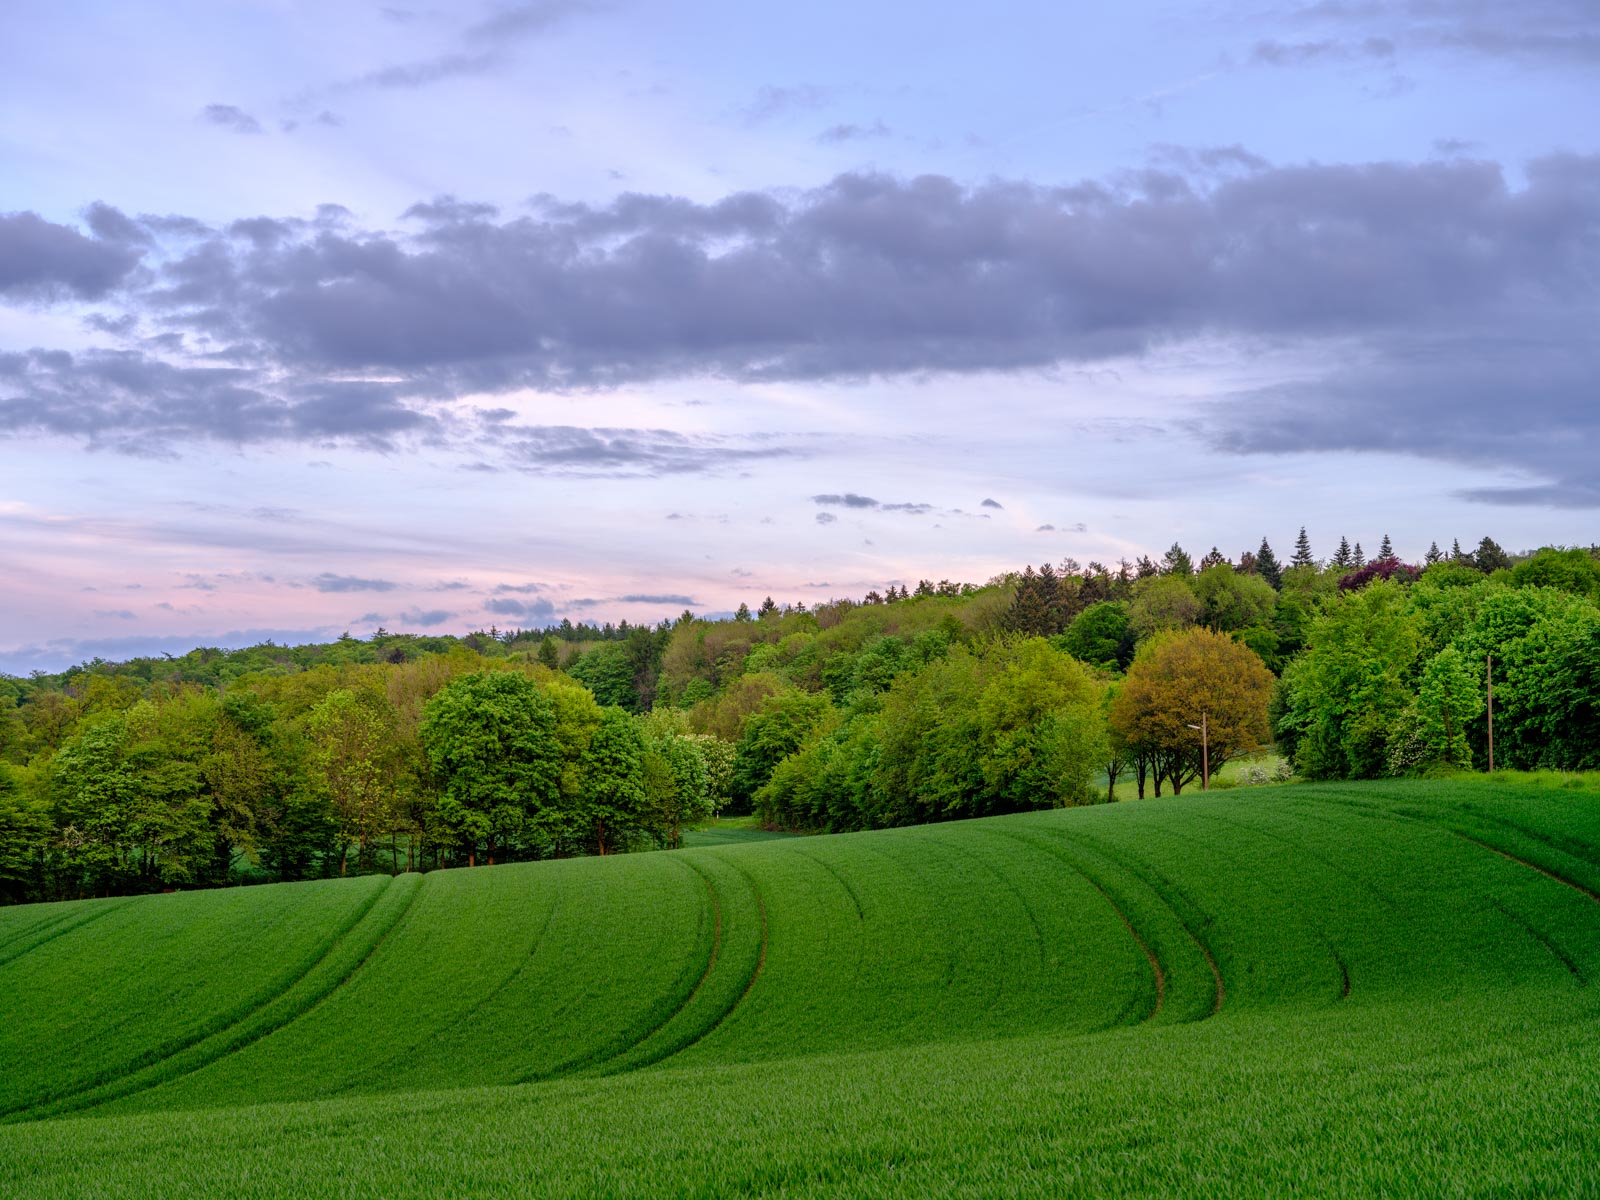 Field in the Teutoburg Forest at dusk in May 2021 (Bielefeld, Germany).